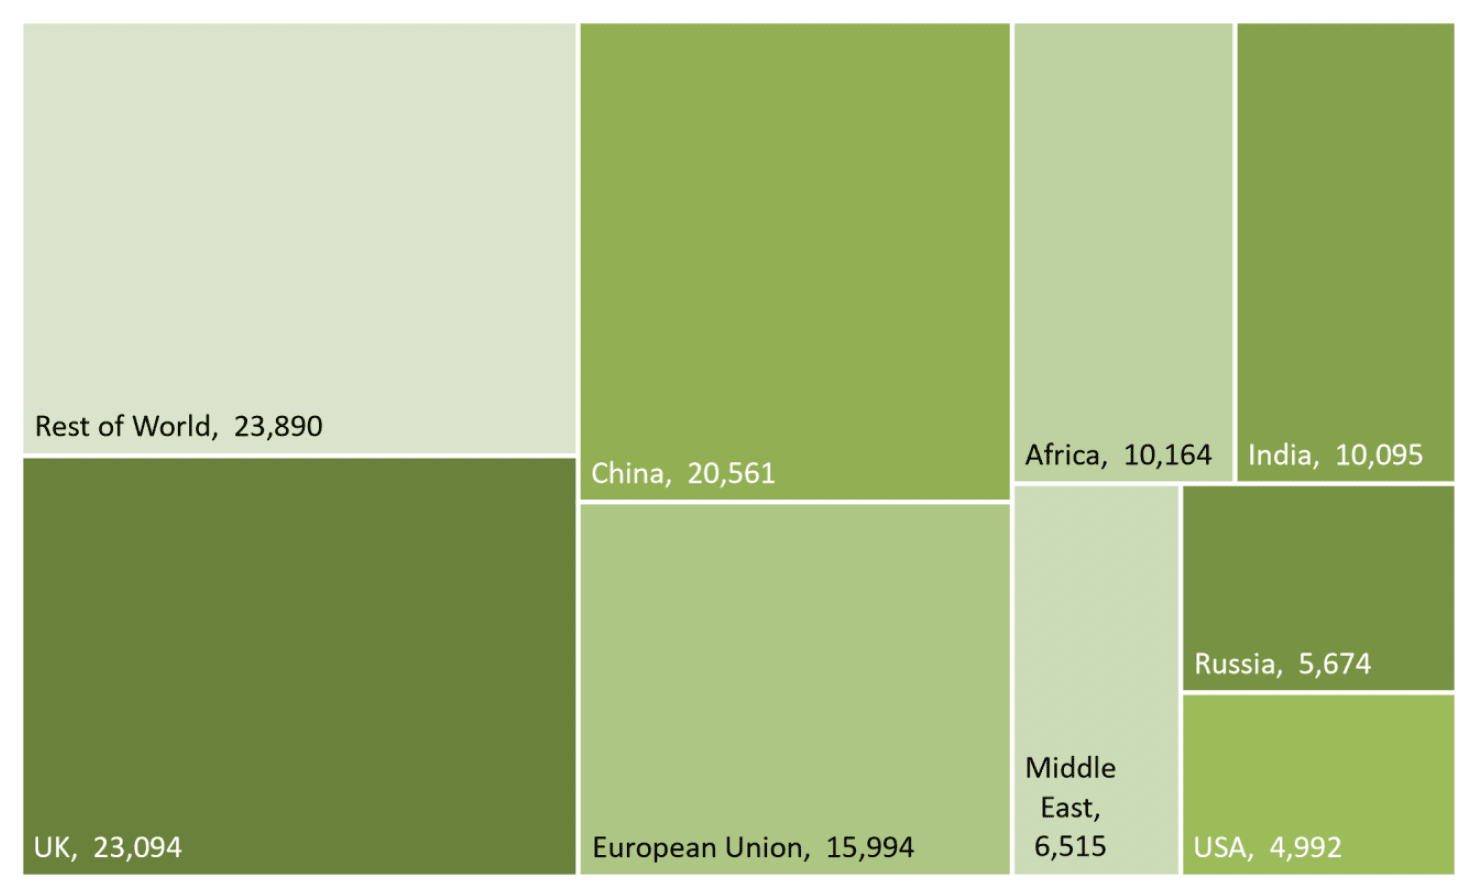 Treemap chart, showing the size of the categories in relation to each other by rectangles of proportionate size. No one category dominates. 